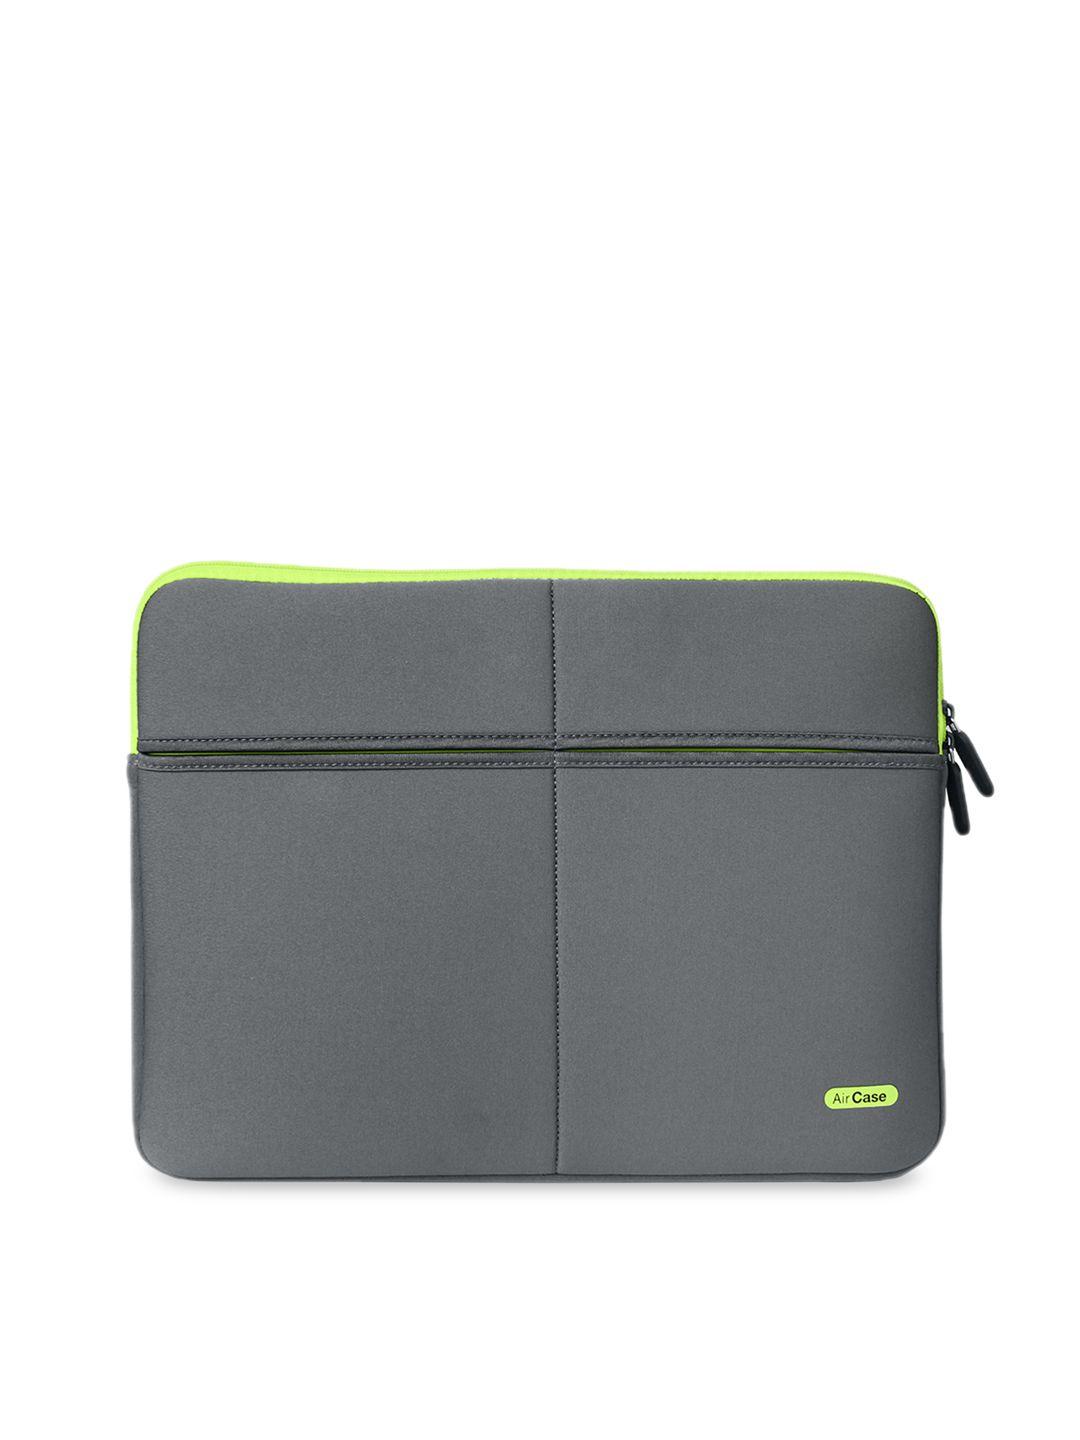 aircase unisex grey 15.6 inch solid laptop sleeve with 6 pockets